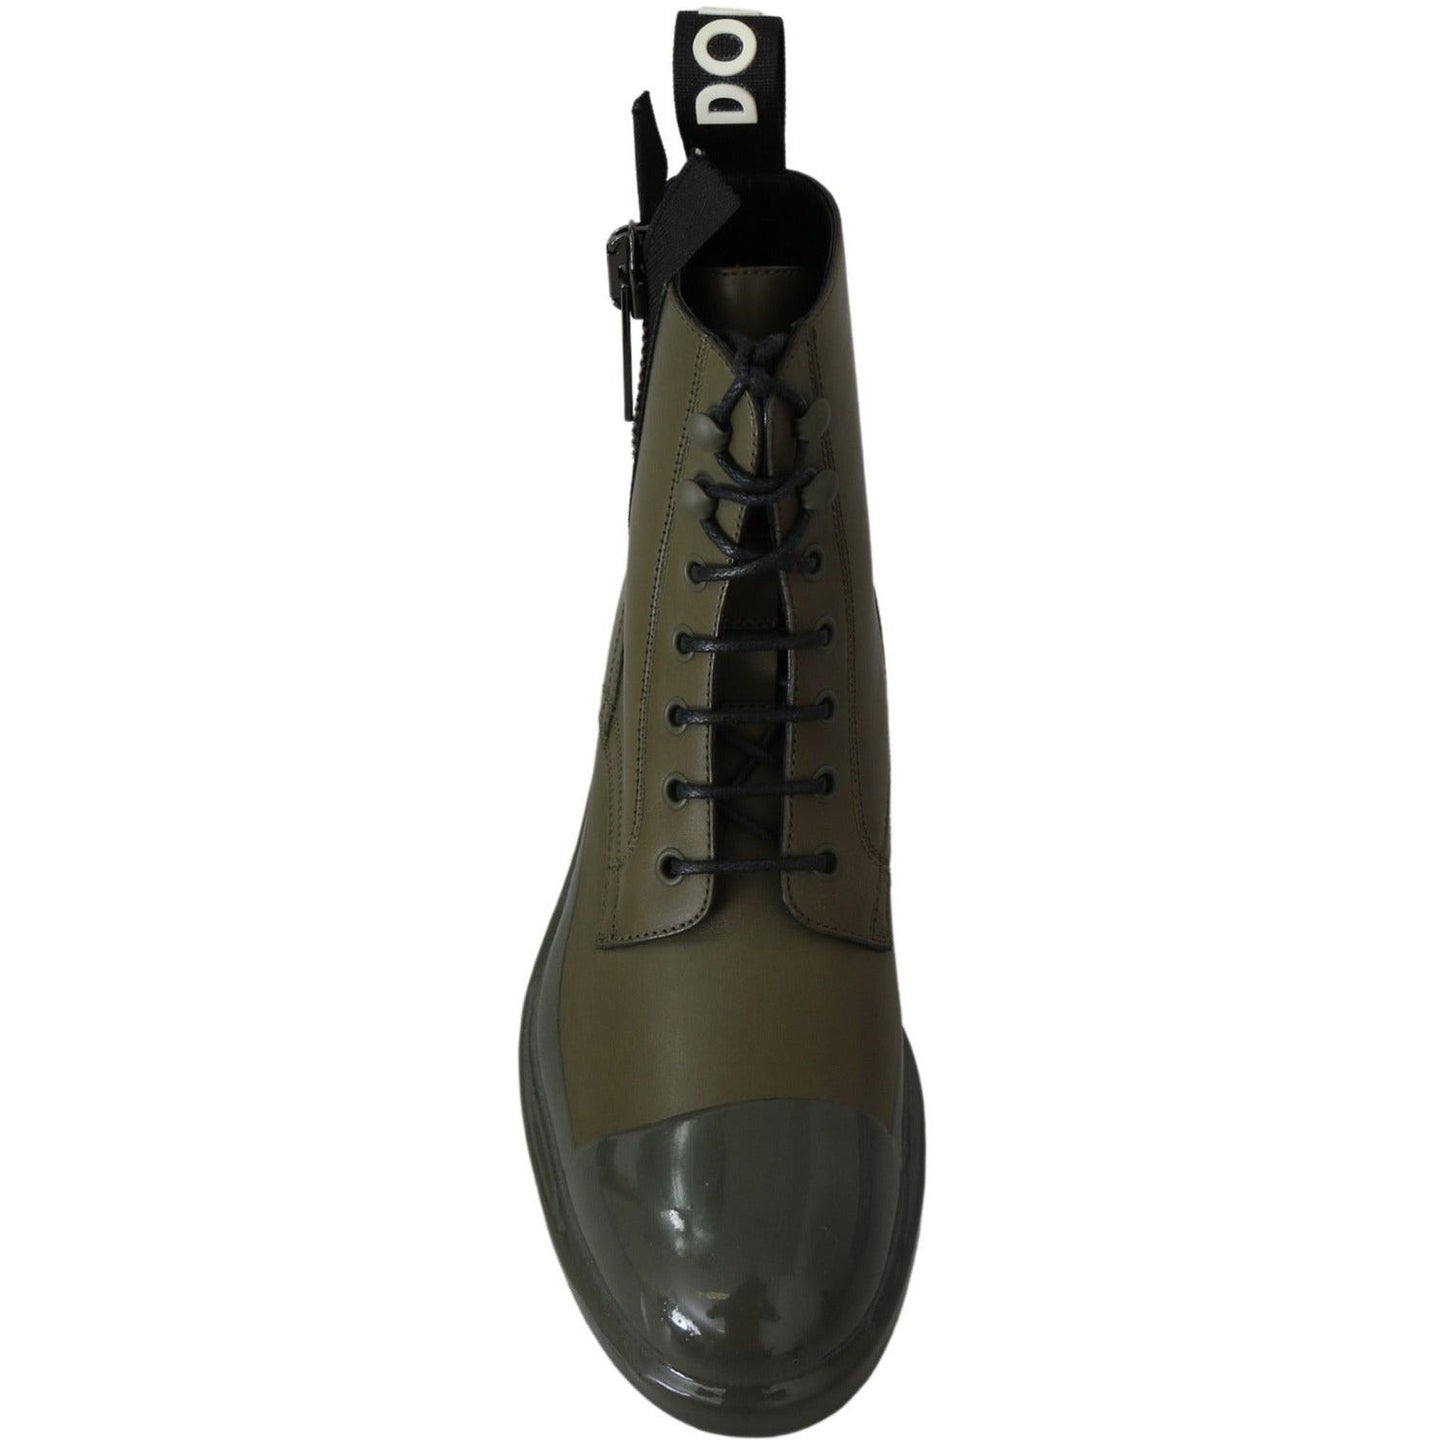 Dolce & Gabbana Chic Military Green Leather Ankle Boots green-leather-boots-zipper-mens-shoes